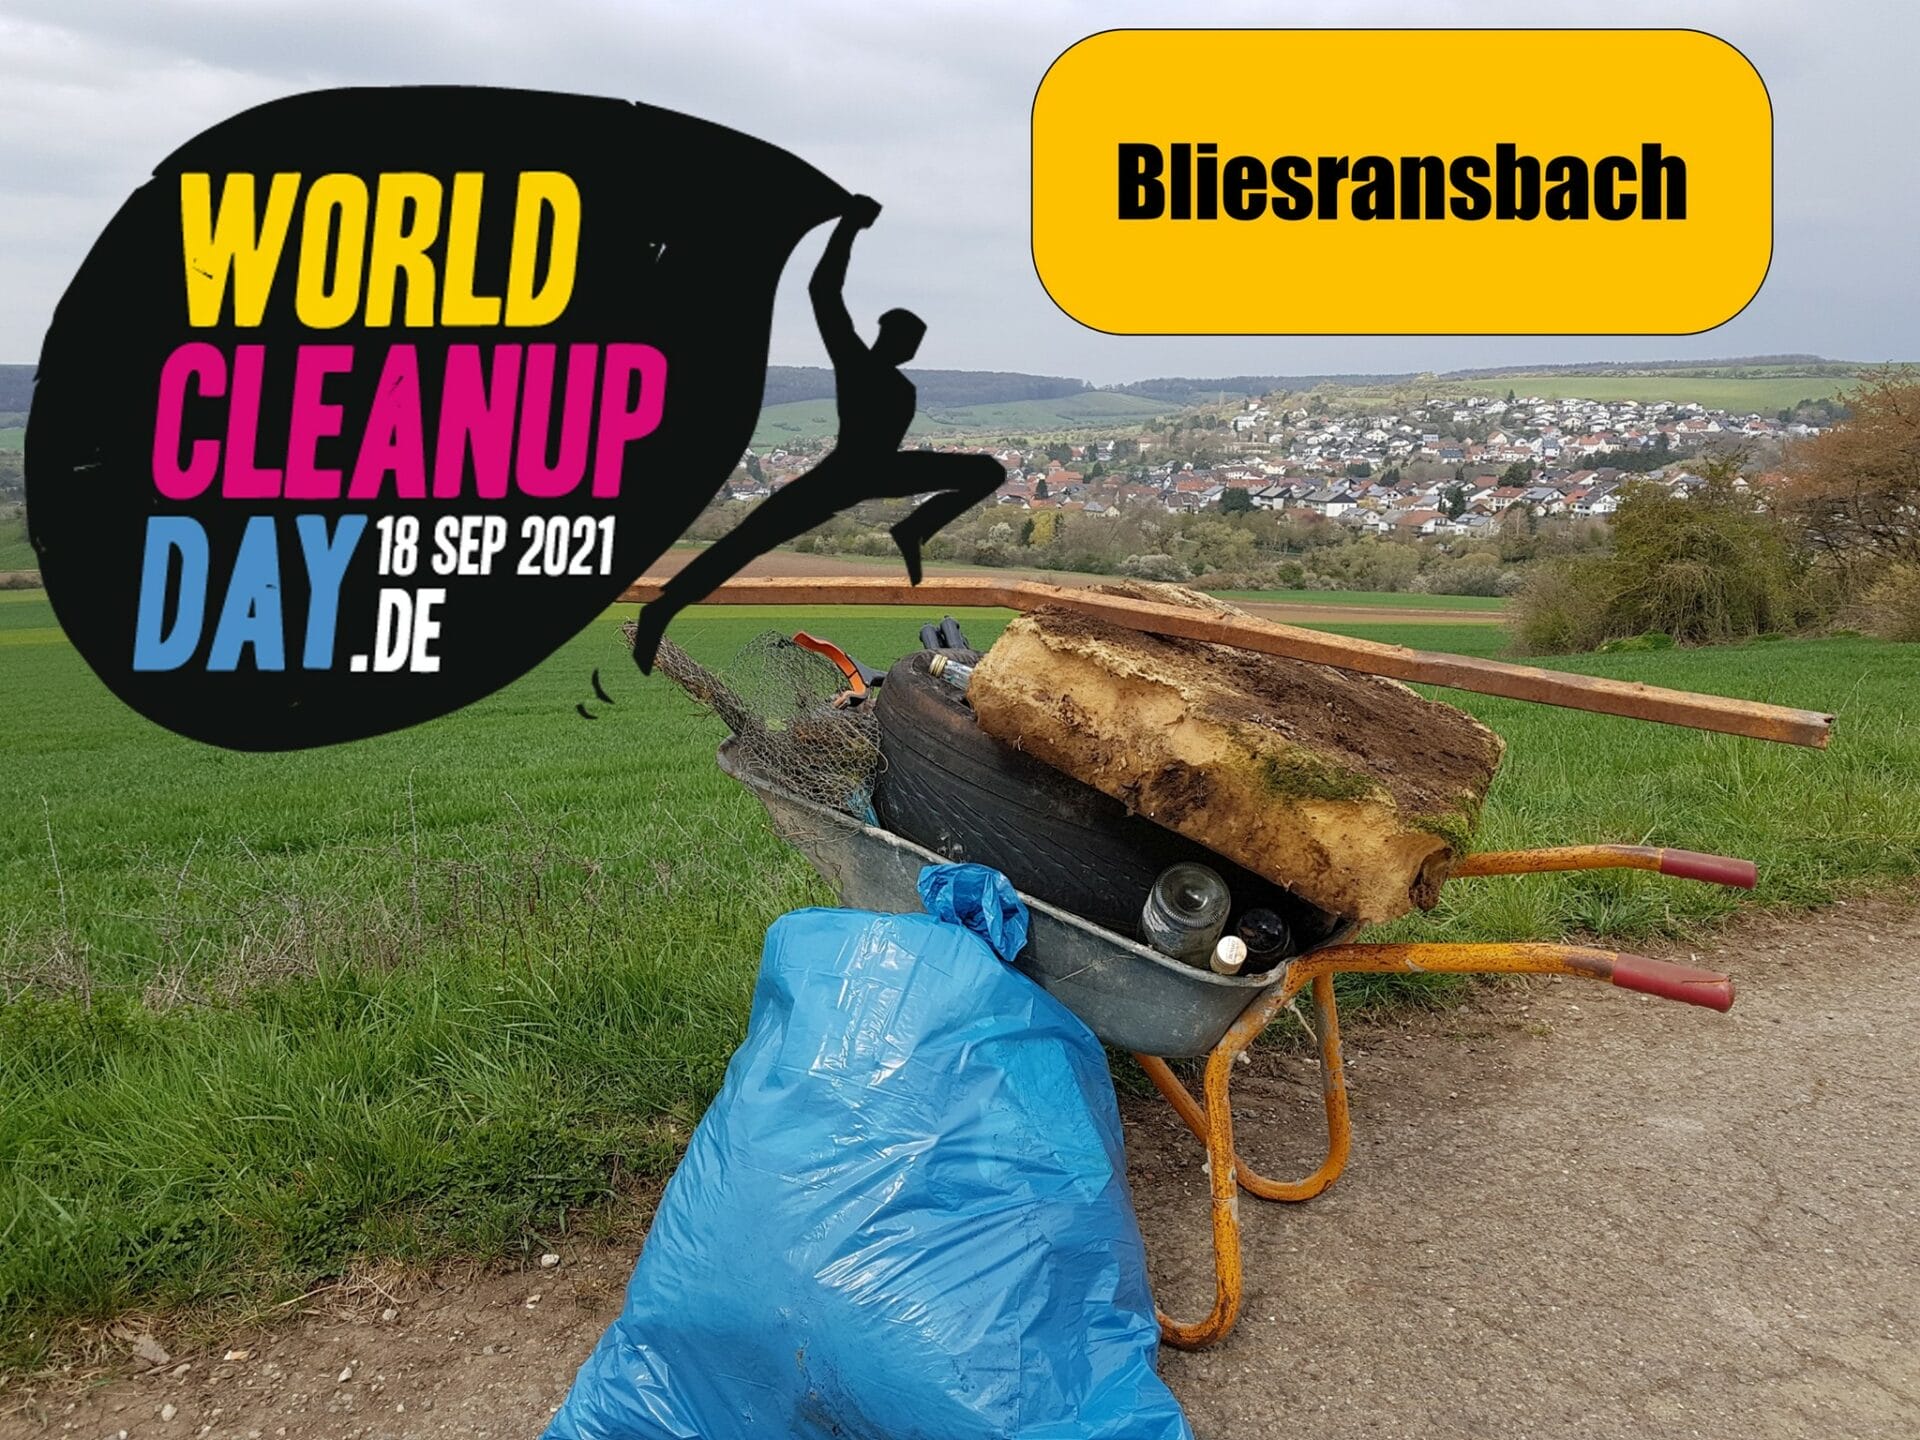 World Cleanup Day in Bliesransbach - (Saarland)